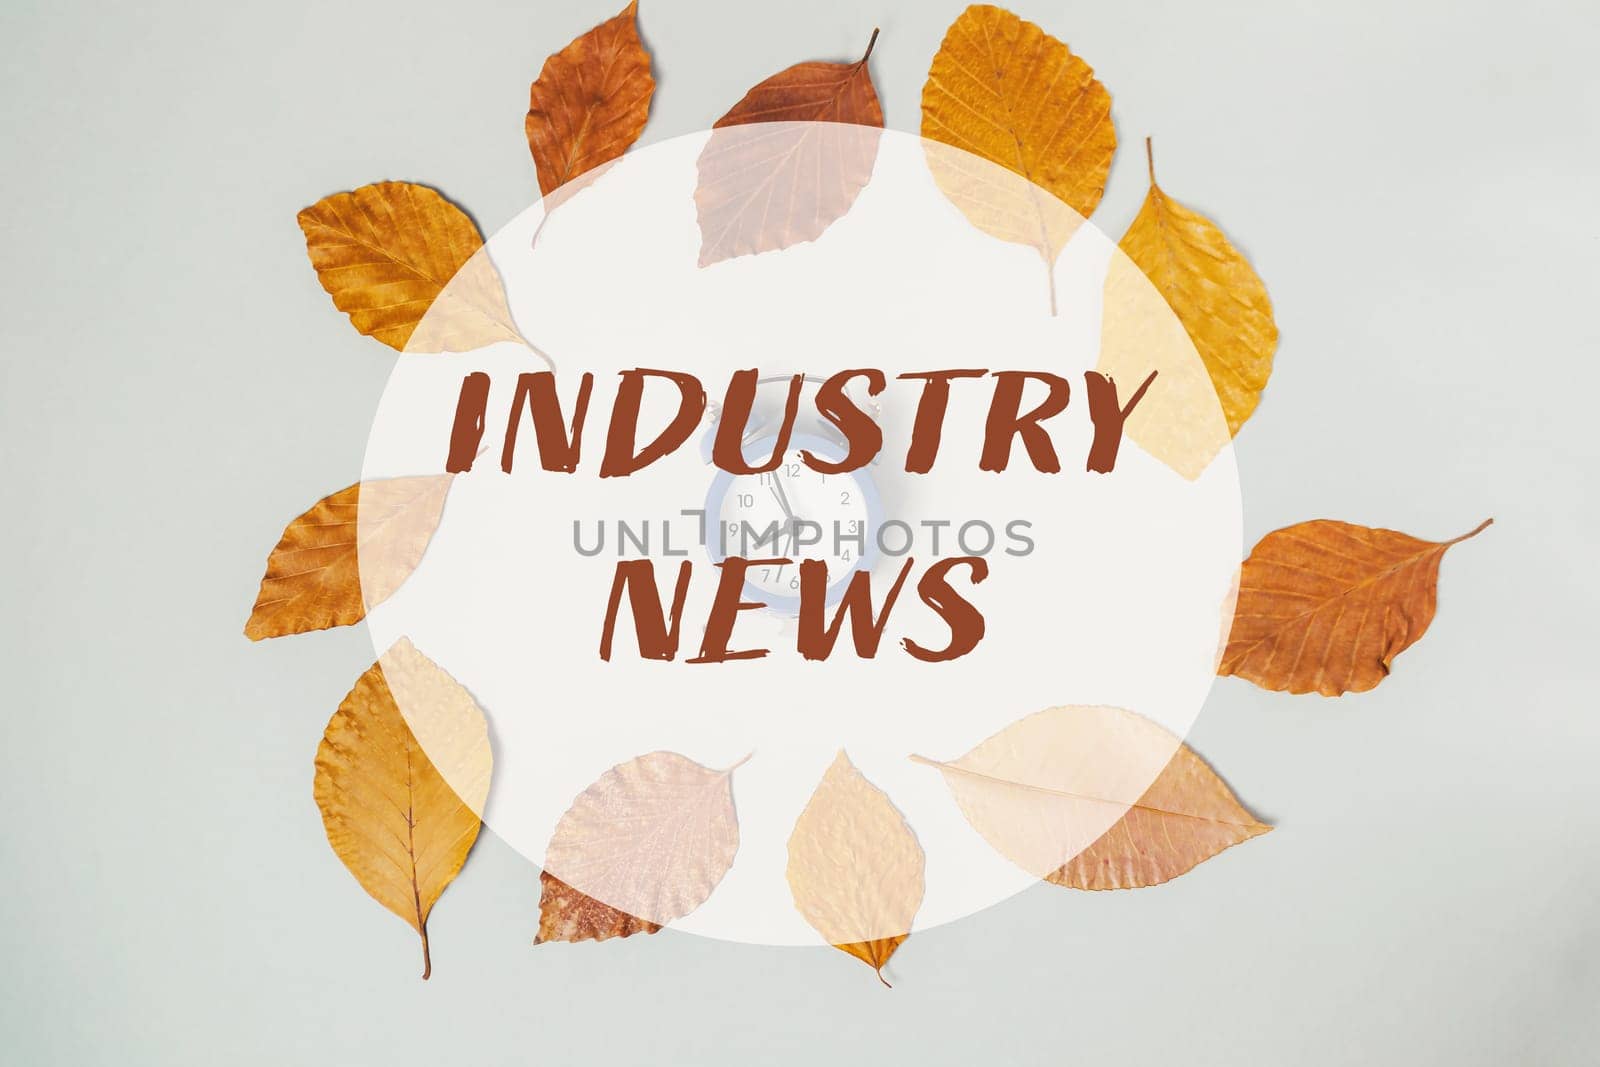 A circle of leaves with the words Industry News written in the center. The leaves are orange and brown and the circle is white